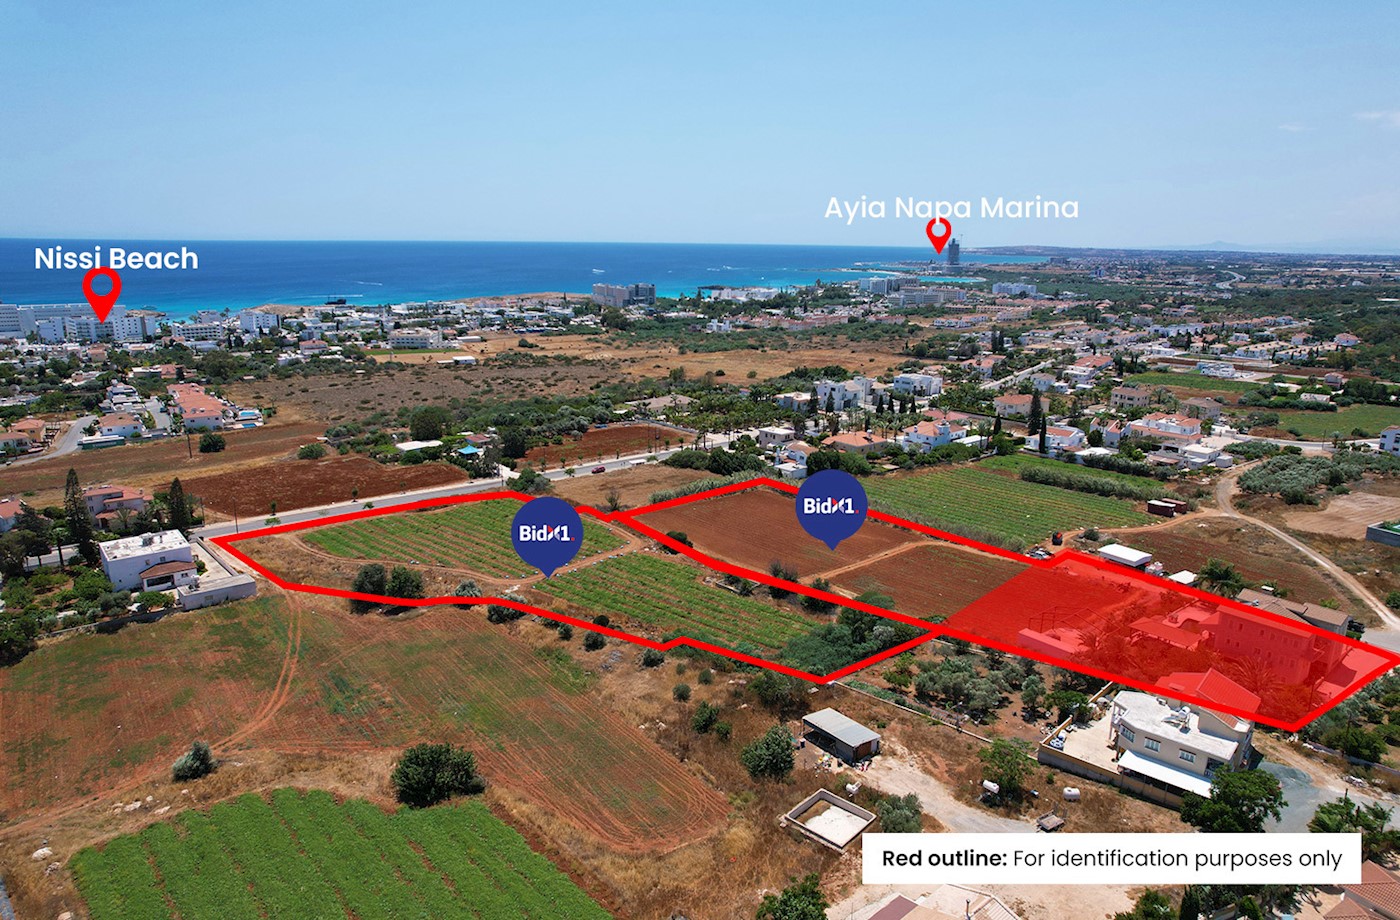 2 x contiguous residential fields in Ayia Napa, Famagusta 1/3